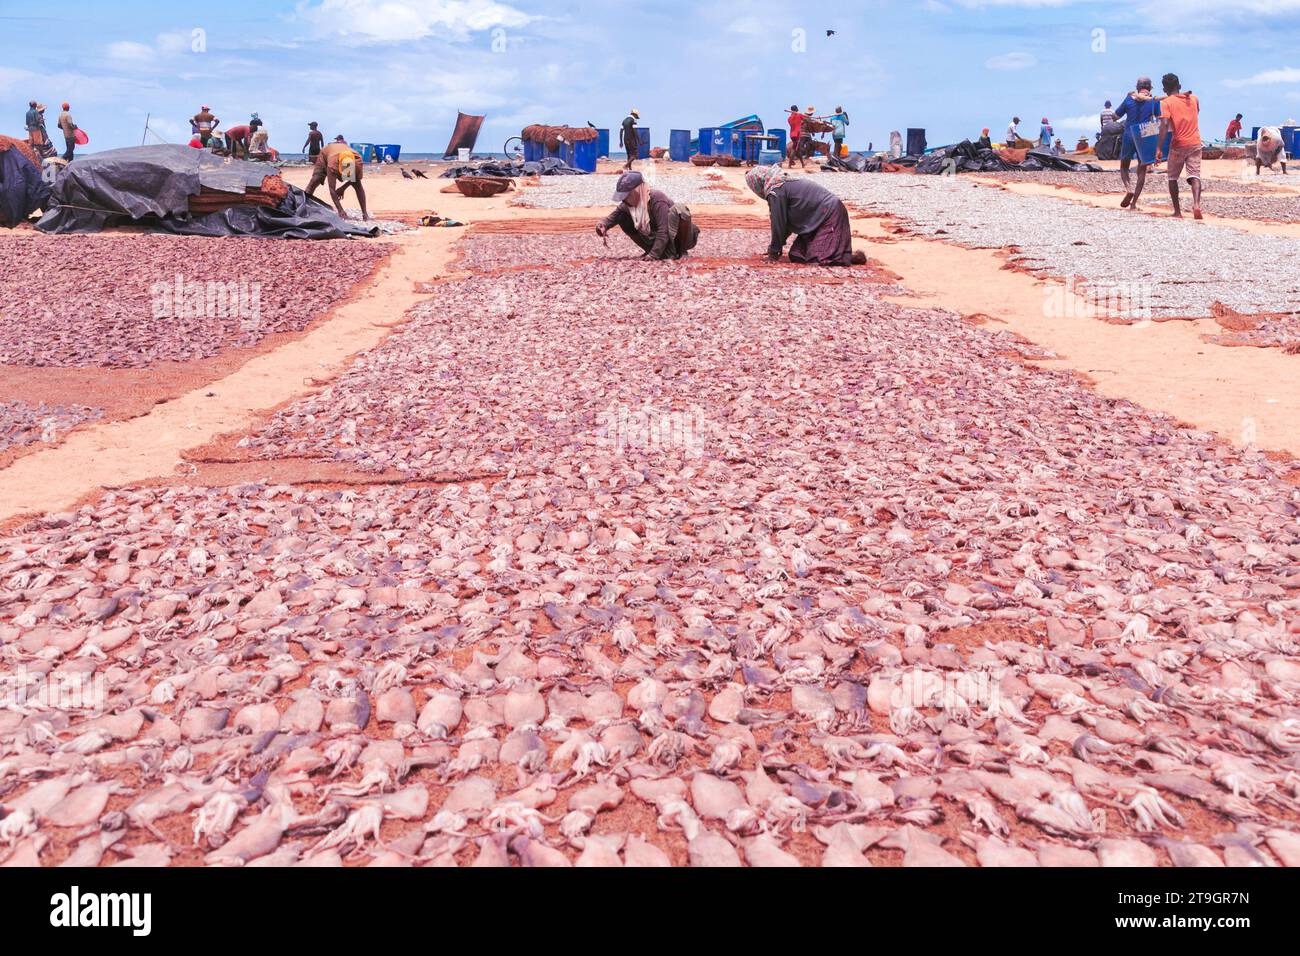 Workers arrange recently caught squid in neat lines to dry out in the sun in Negombo in Sri Lanka Stock Photo